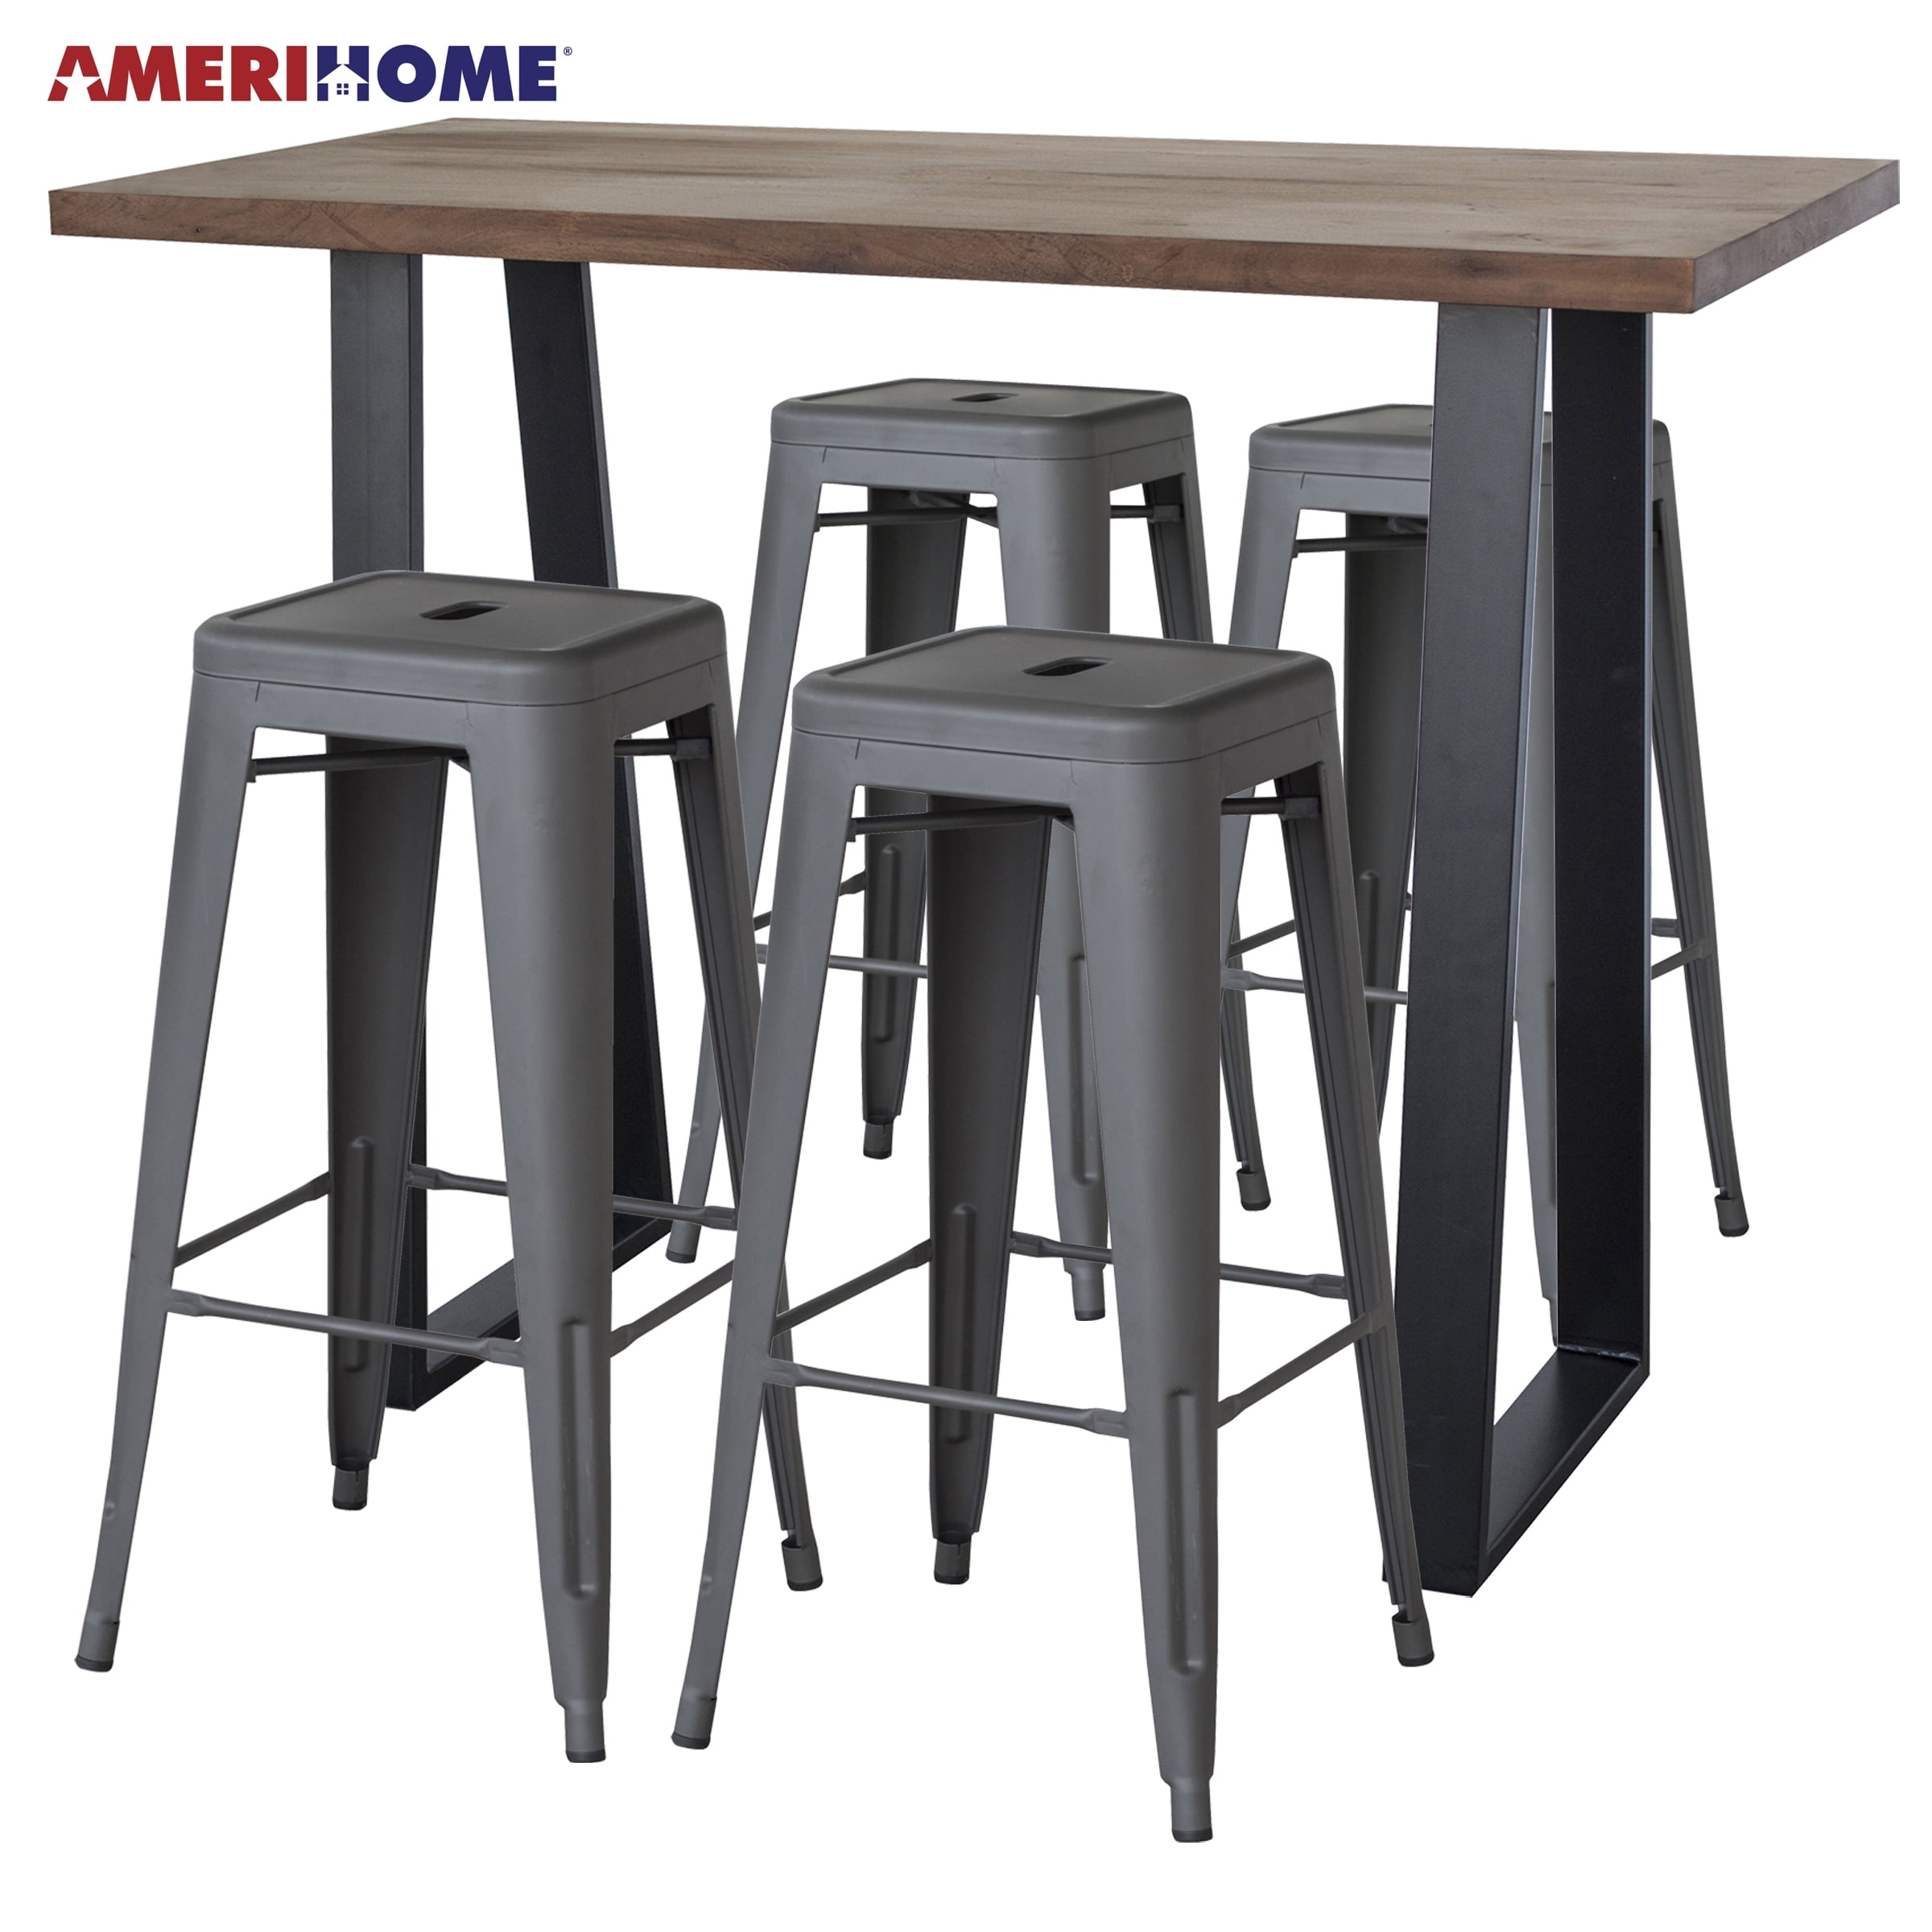 Picture of AmeriHome AWBTGMZ4 Acacia Wood Top Bar Height Pub Set with Matte Dark Pewter Bar Stools - Silver&#44; Black & Natural Wood - 5 Piece